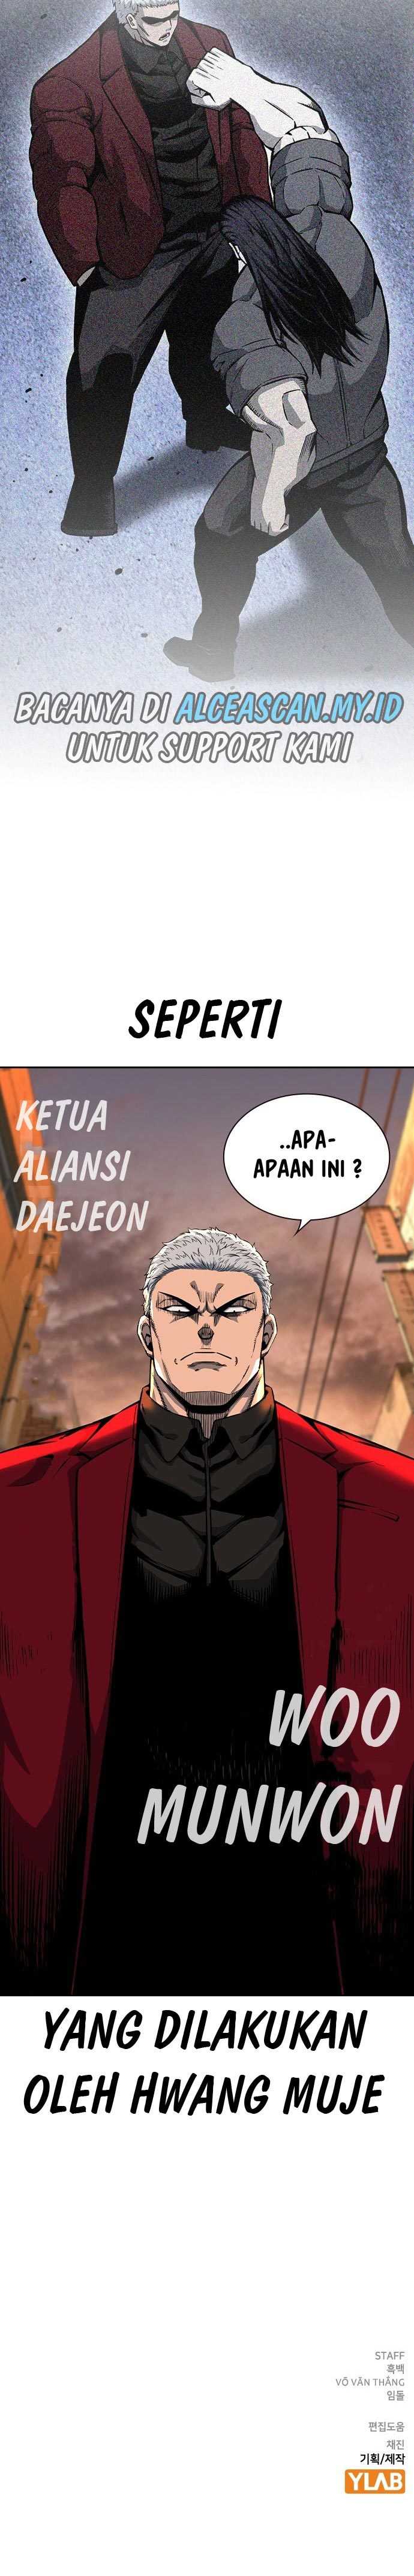 King Game Chapter 89